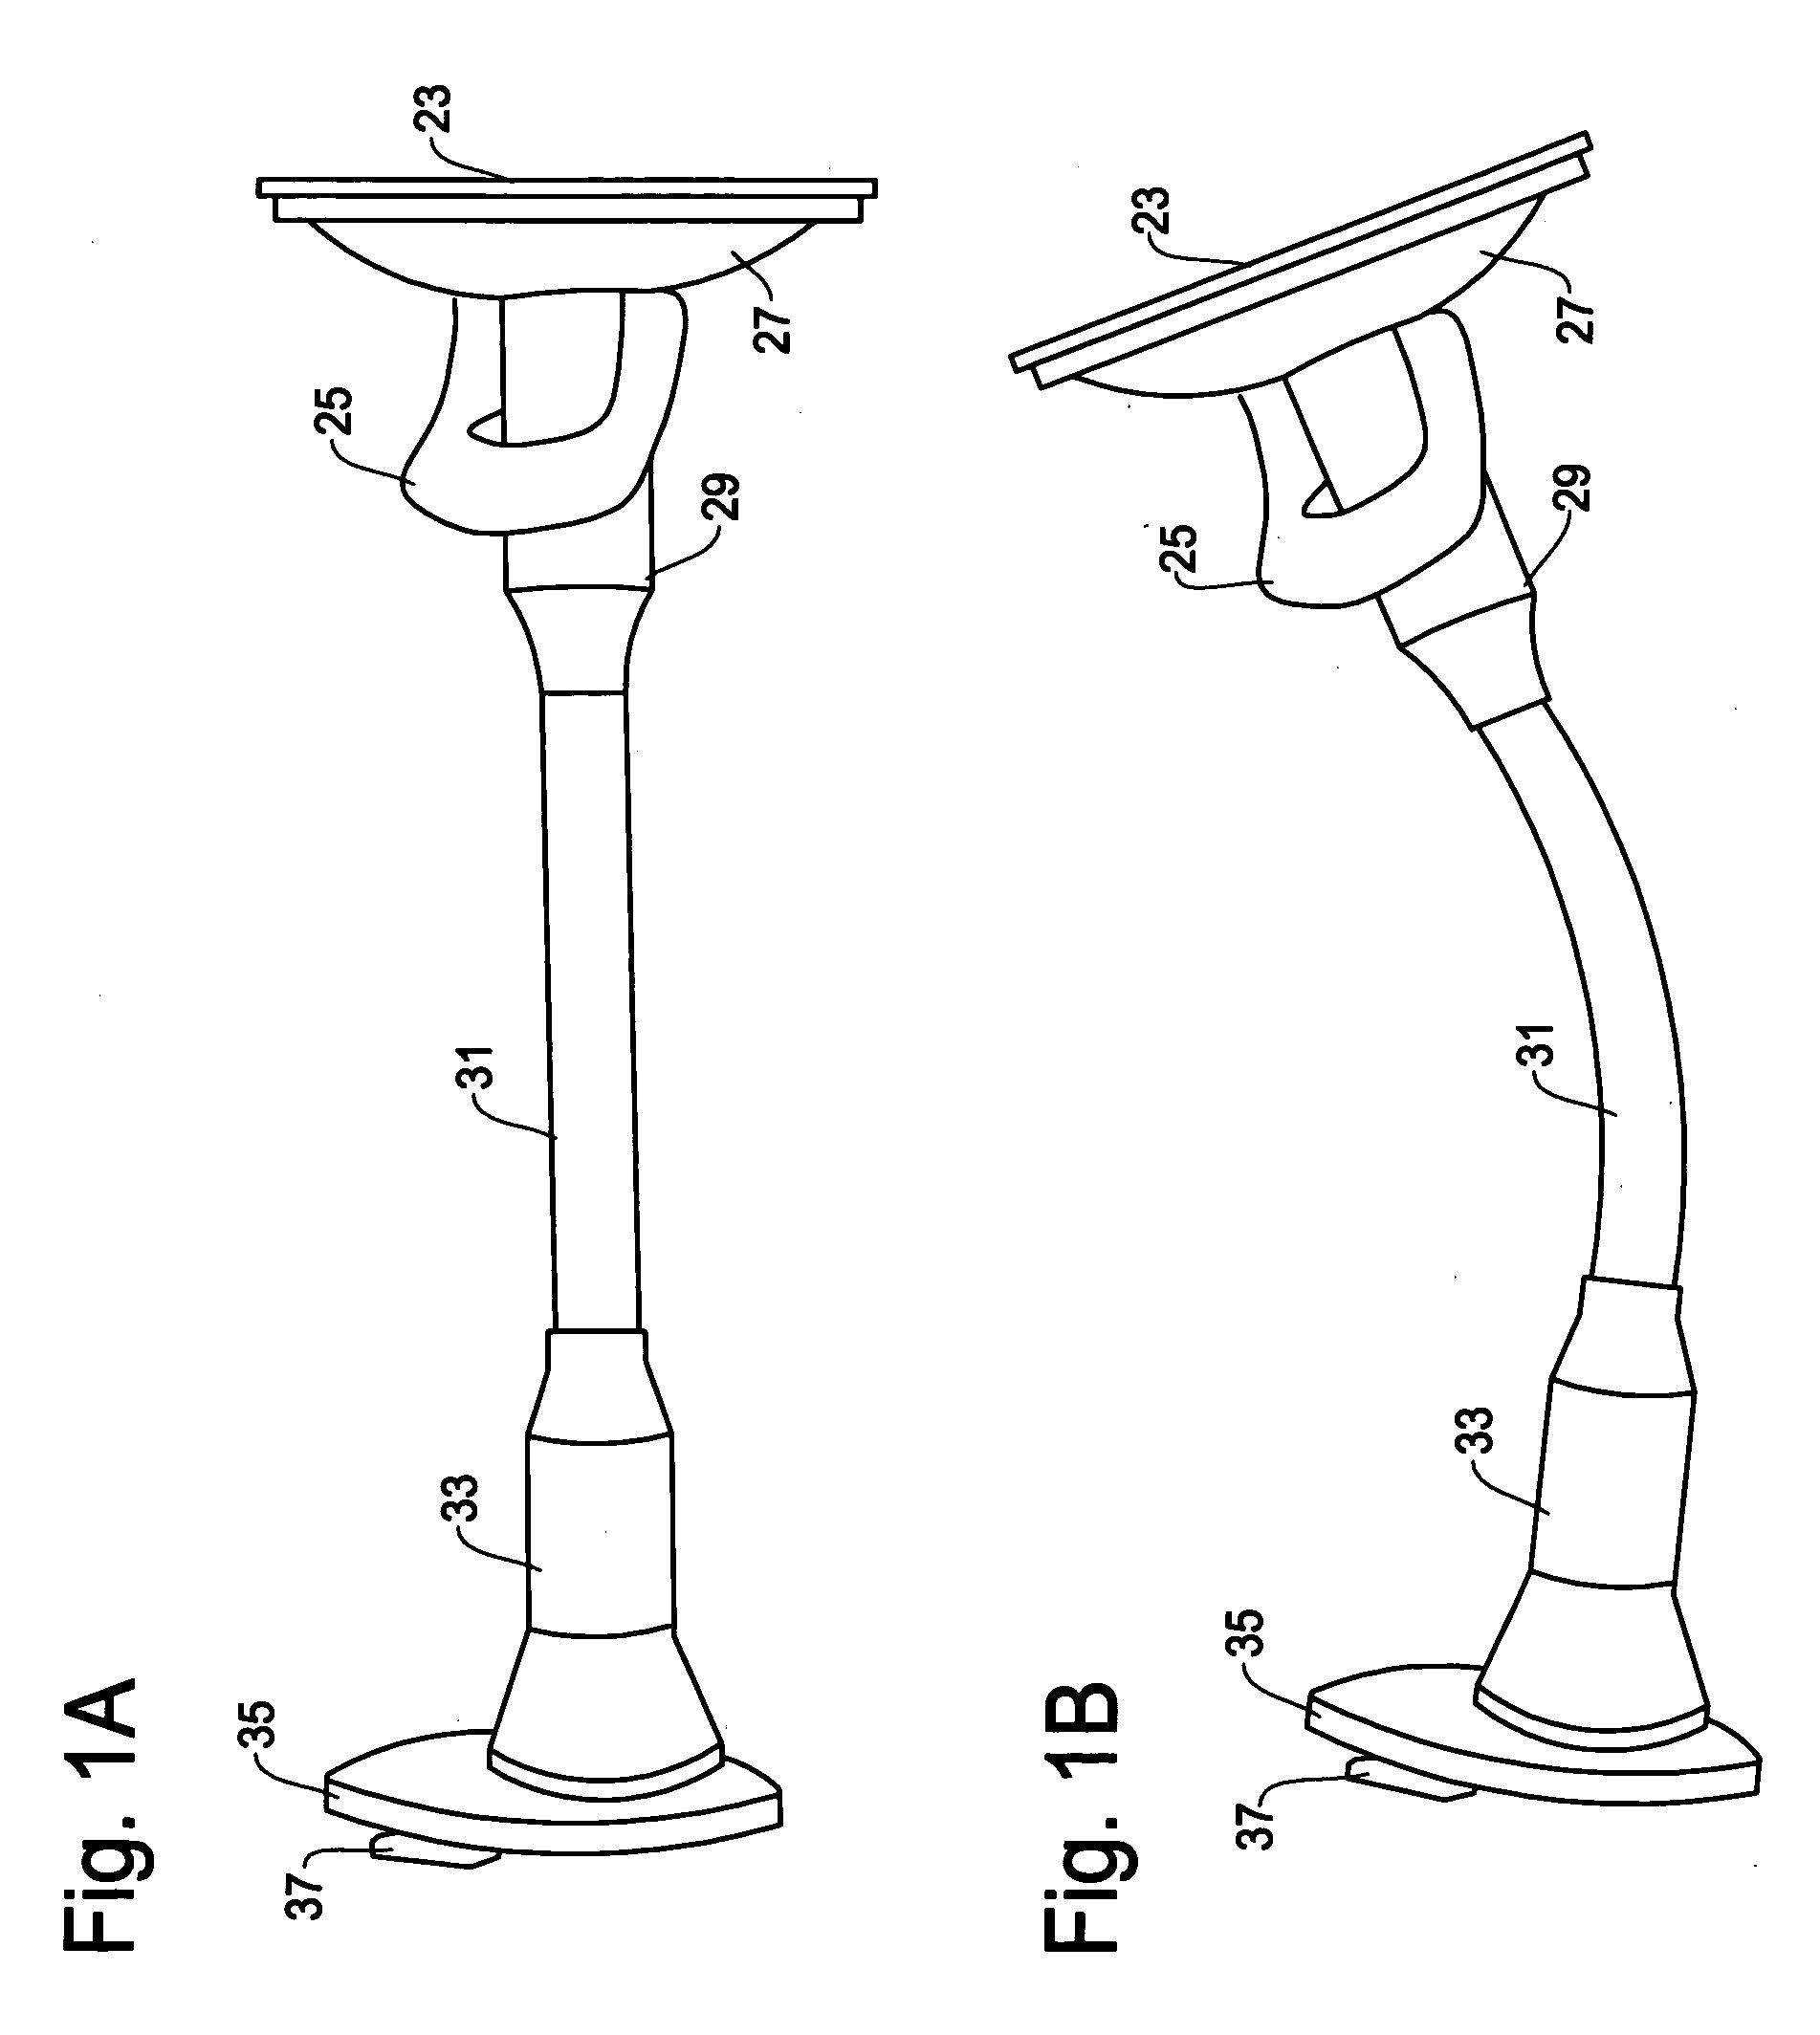 Structure and mechanism of windshield mount and pedestal for portable electronics device